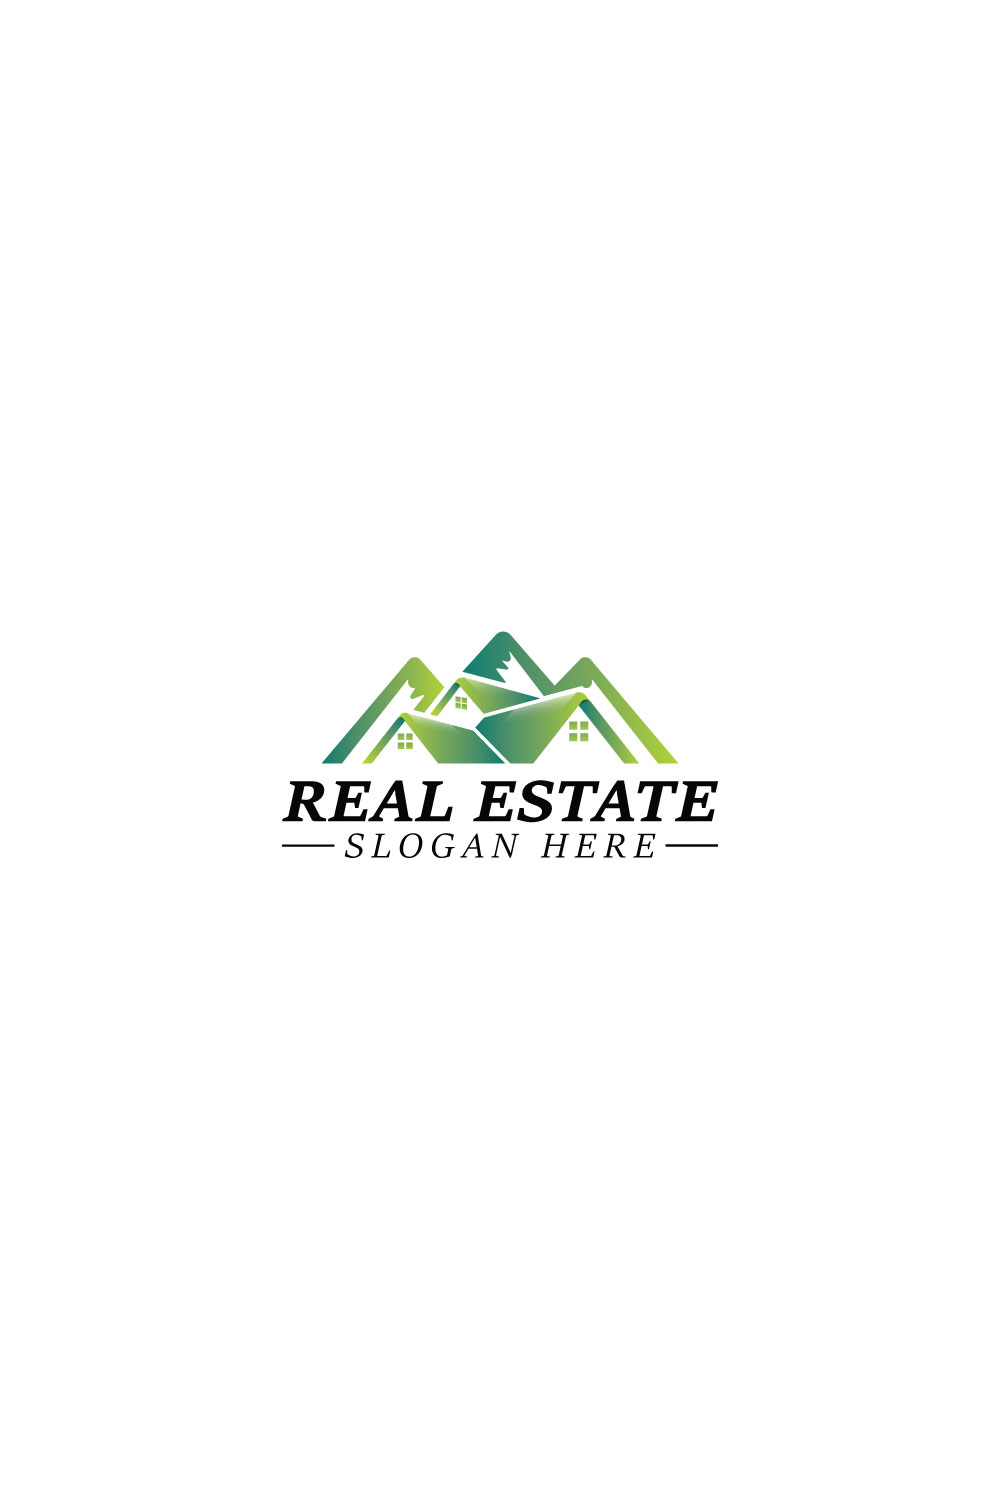 Luxury real estate logo collection with gradient vector design pinterest preview image.